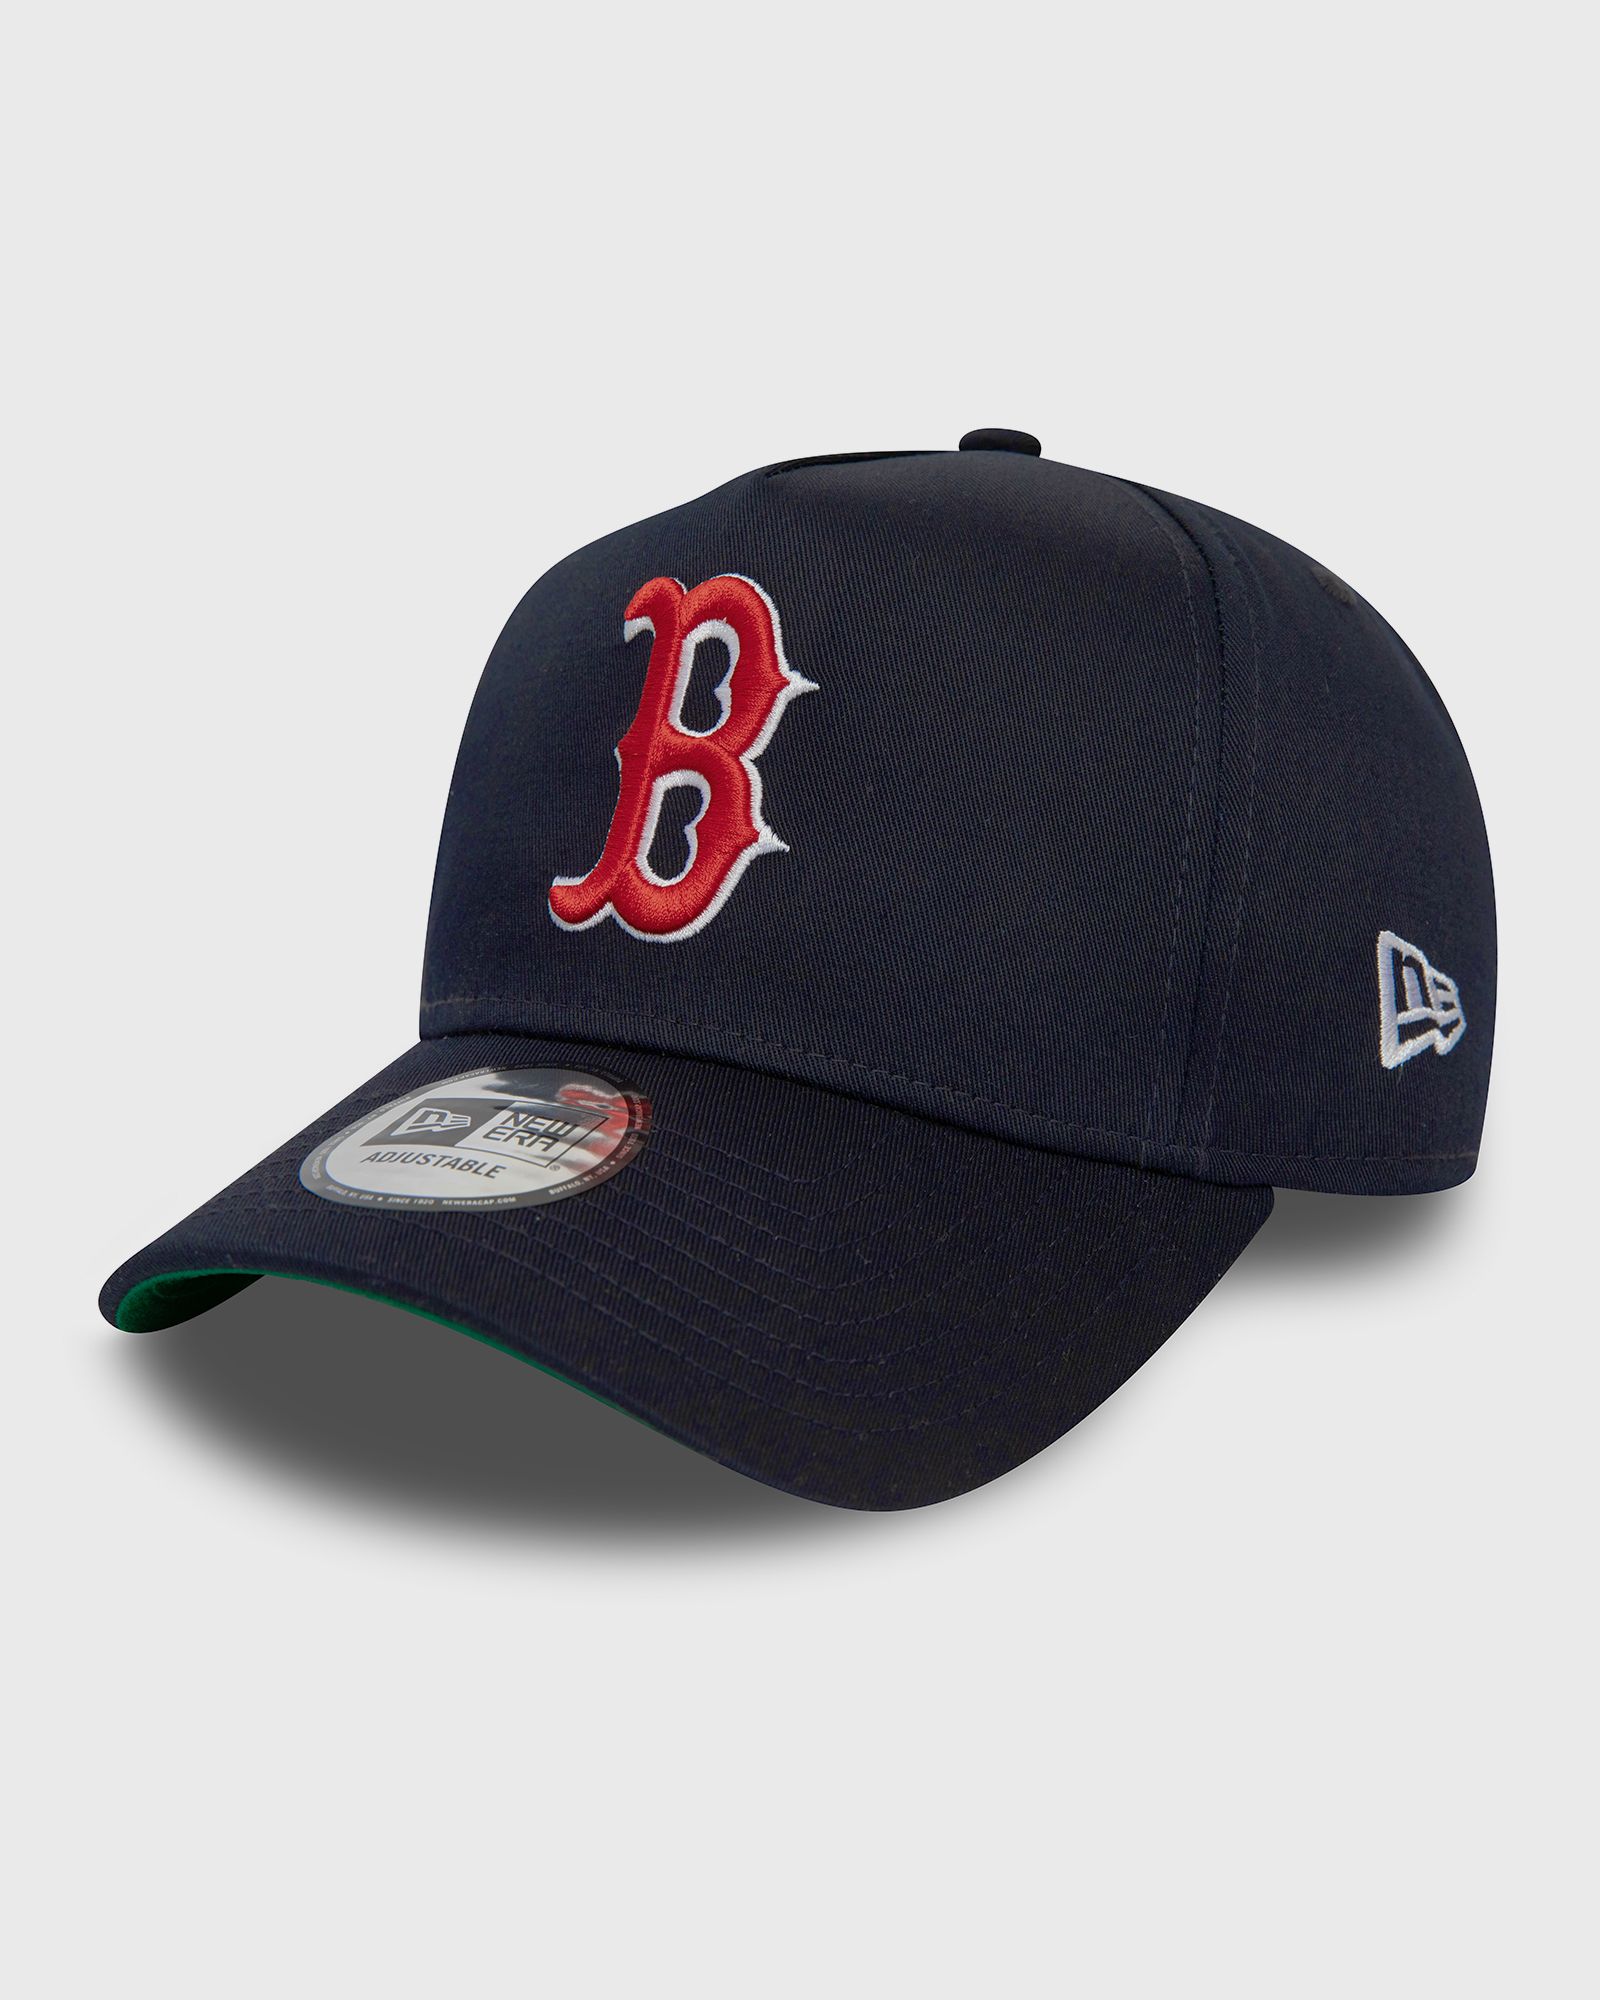 New Era - patch 9forty bosten red sox men caps blue in größe:one size